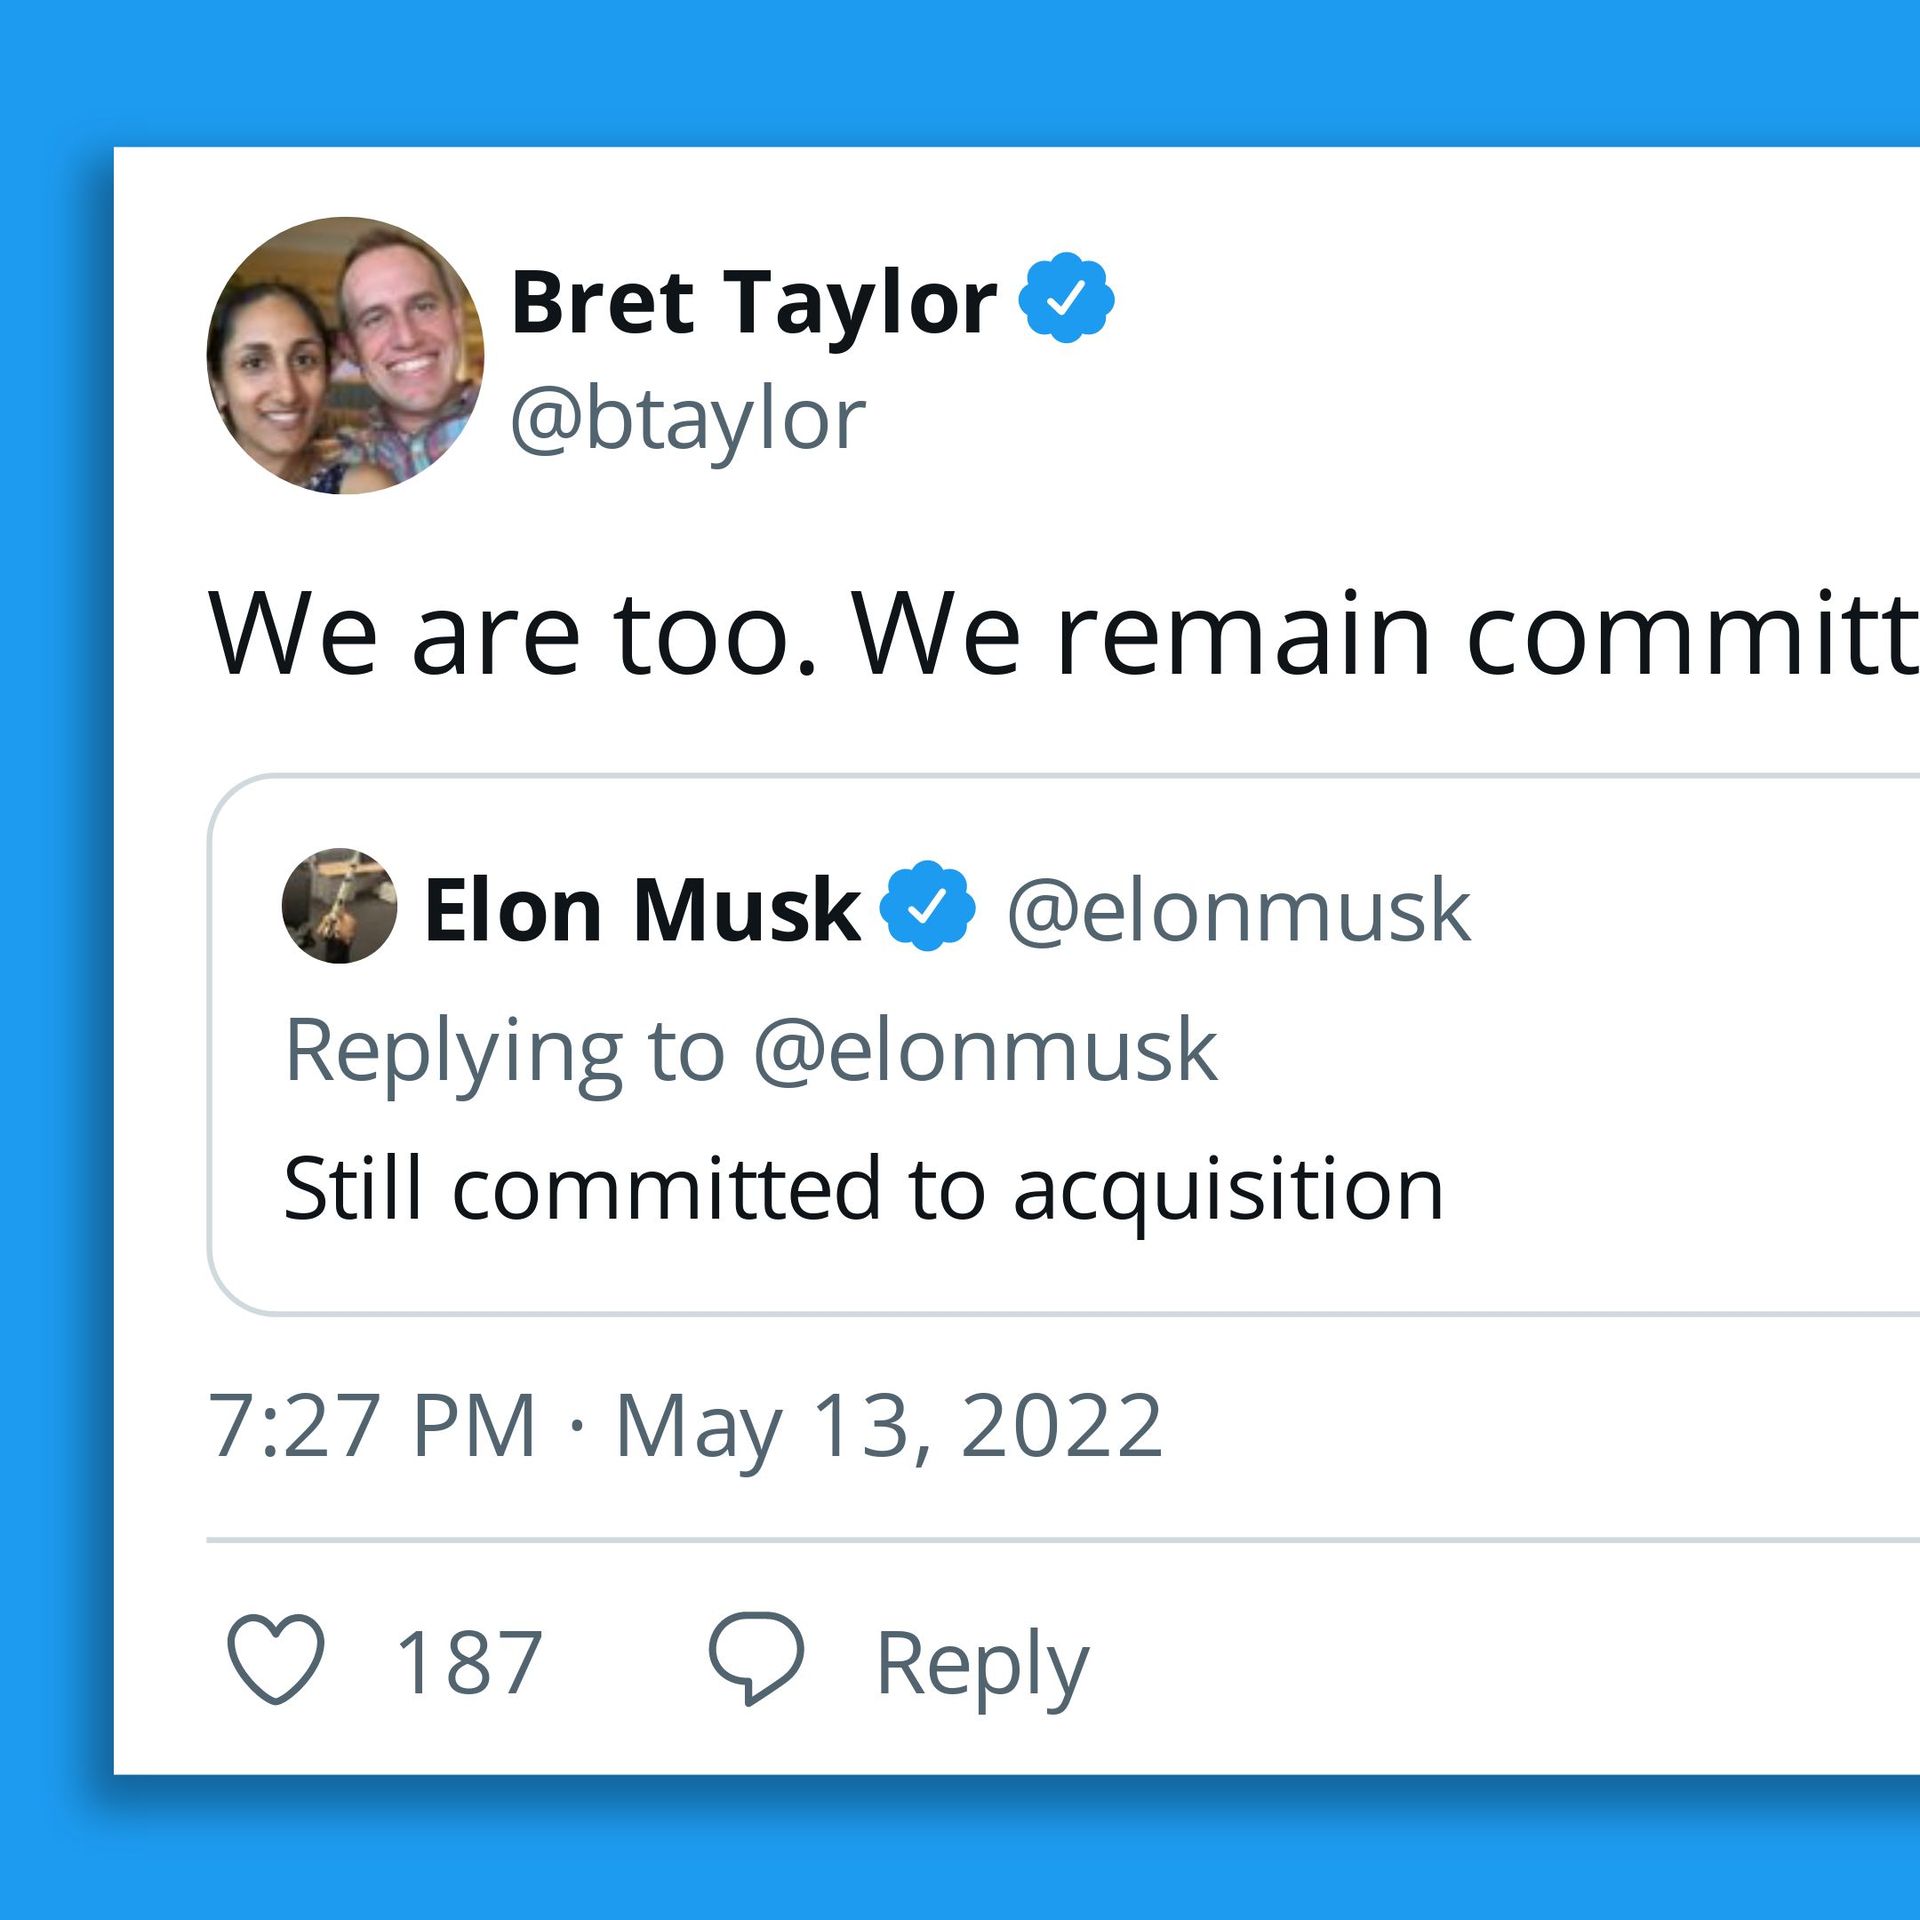 Bret Taylor's "we remain committed" tweet